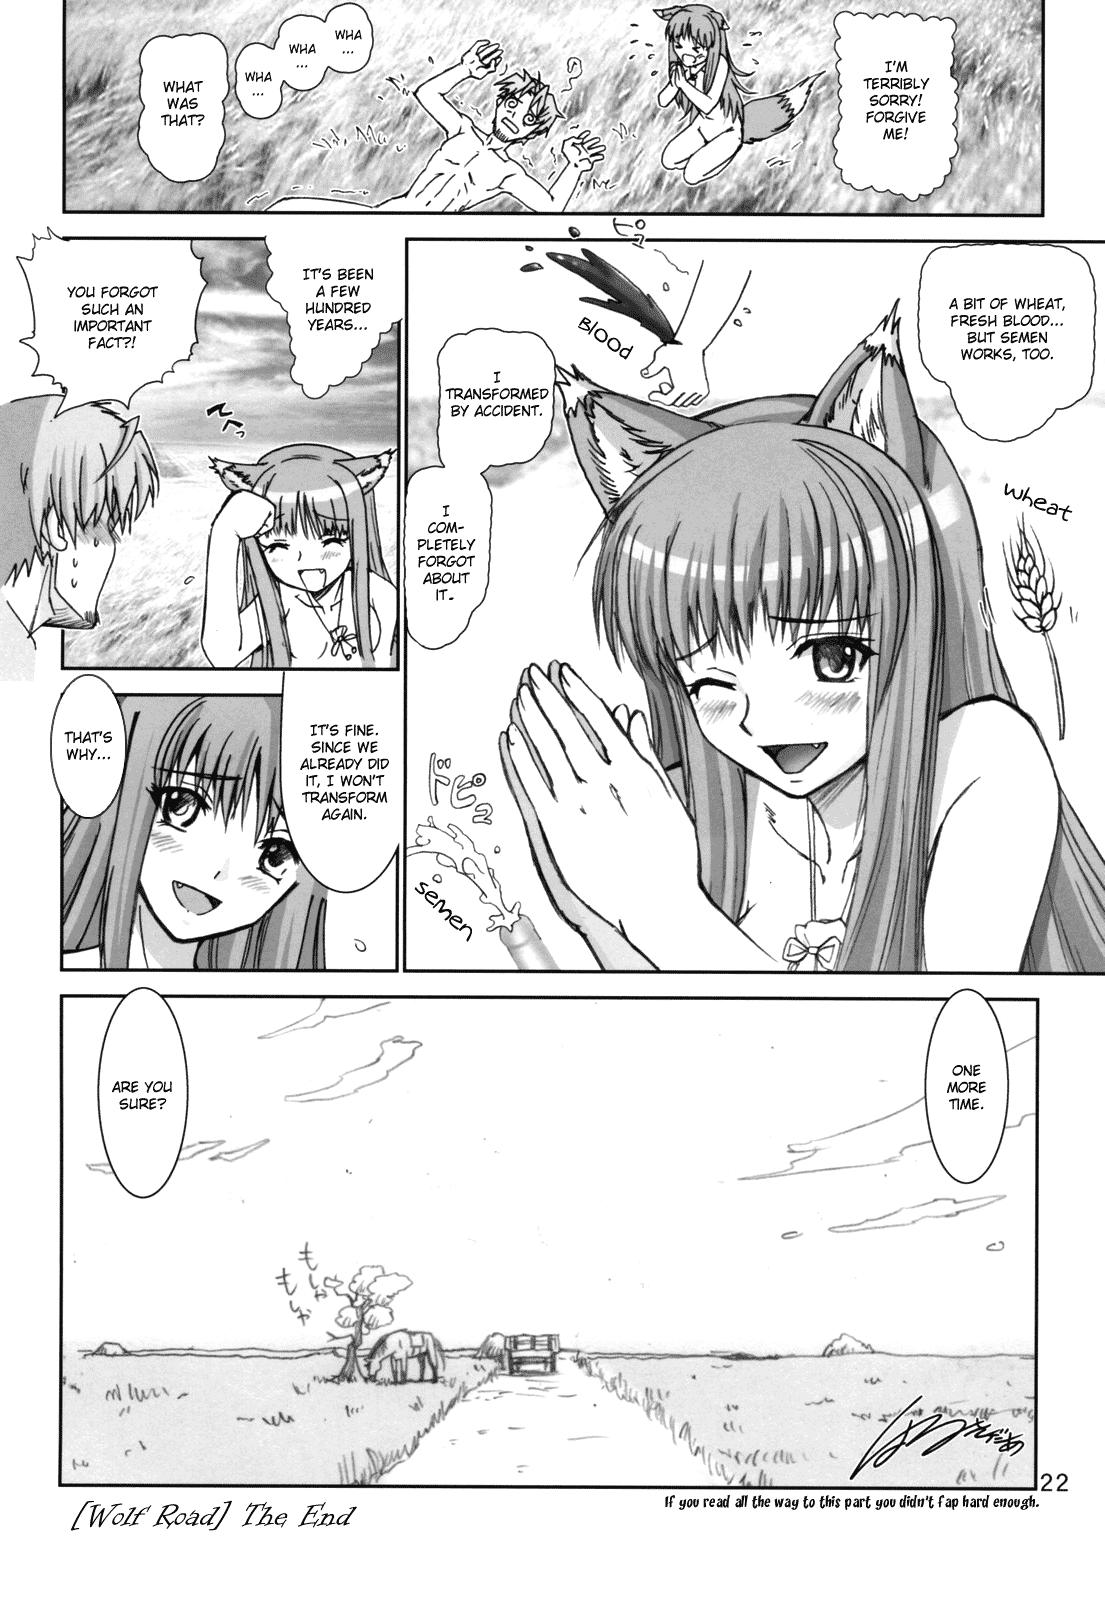 Teentube Wolf Road - Spice and wolf 4some - Page 20